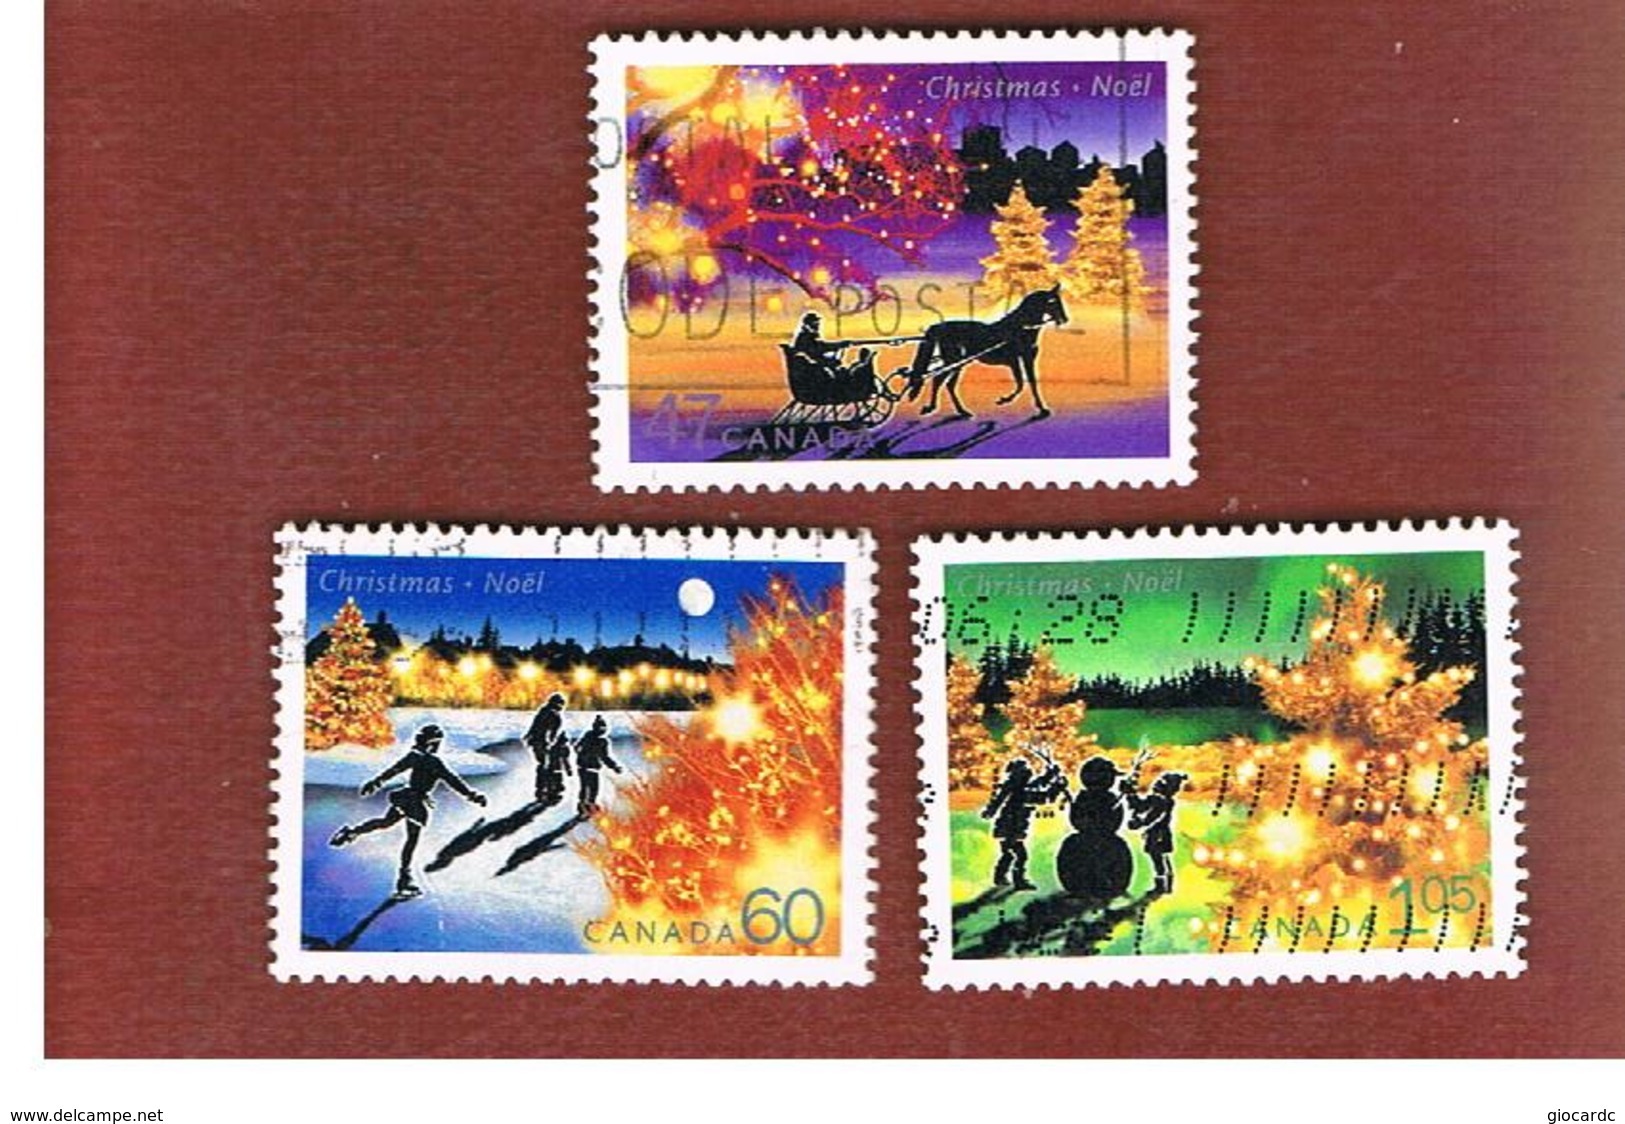 CANADA   -  SG 2110.2112      -  2001 CHRISTMAS: COMPLET SET OF 3       -      USED - Usati